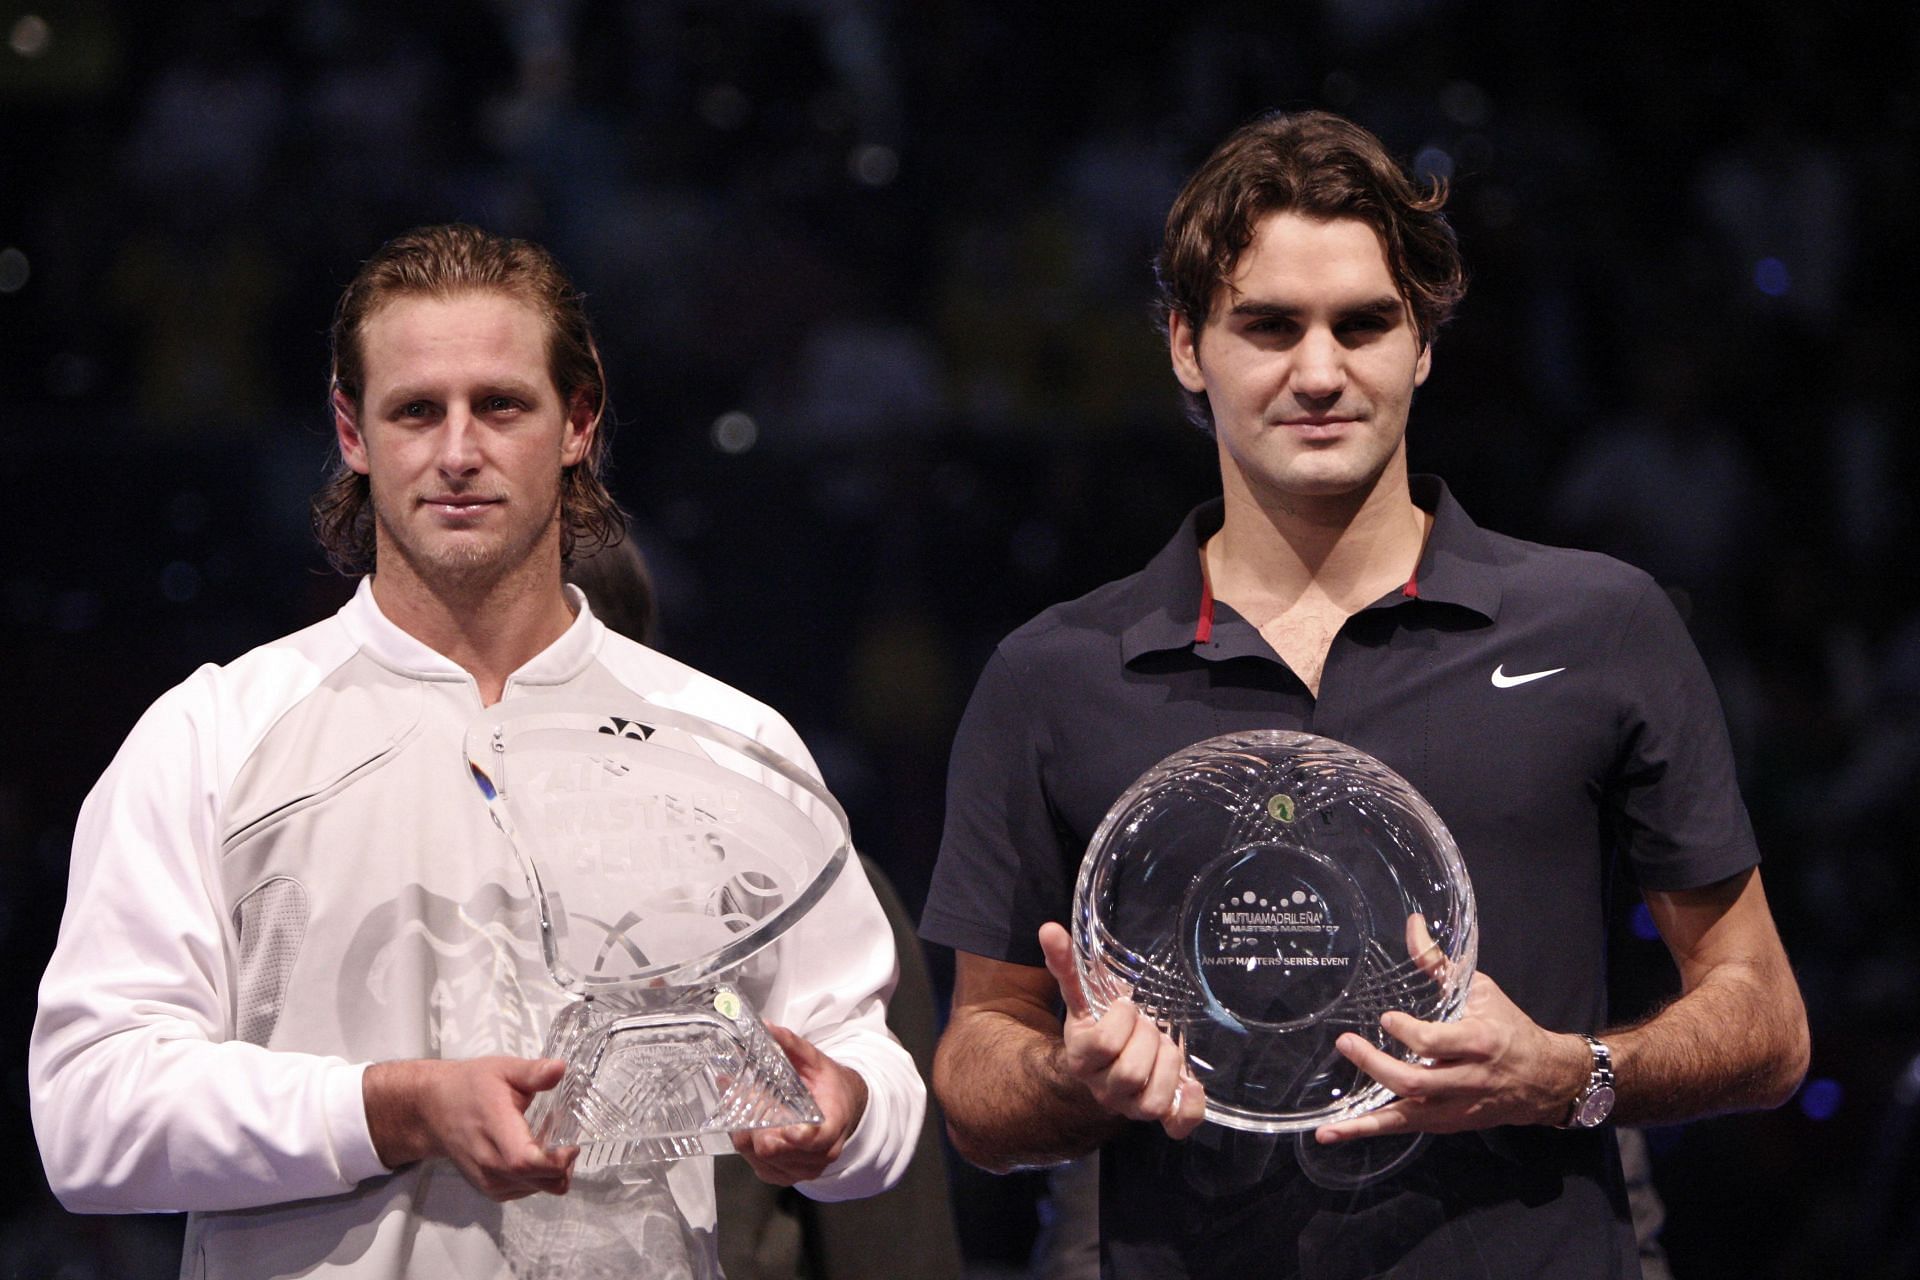 David Nalbandian enjoyed the best week of his career at the 2007 Madrid Masters